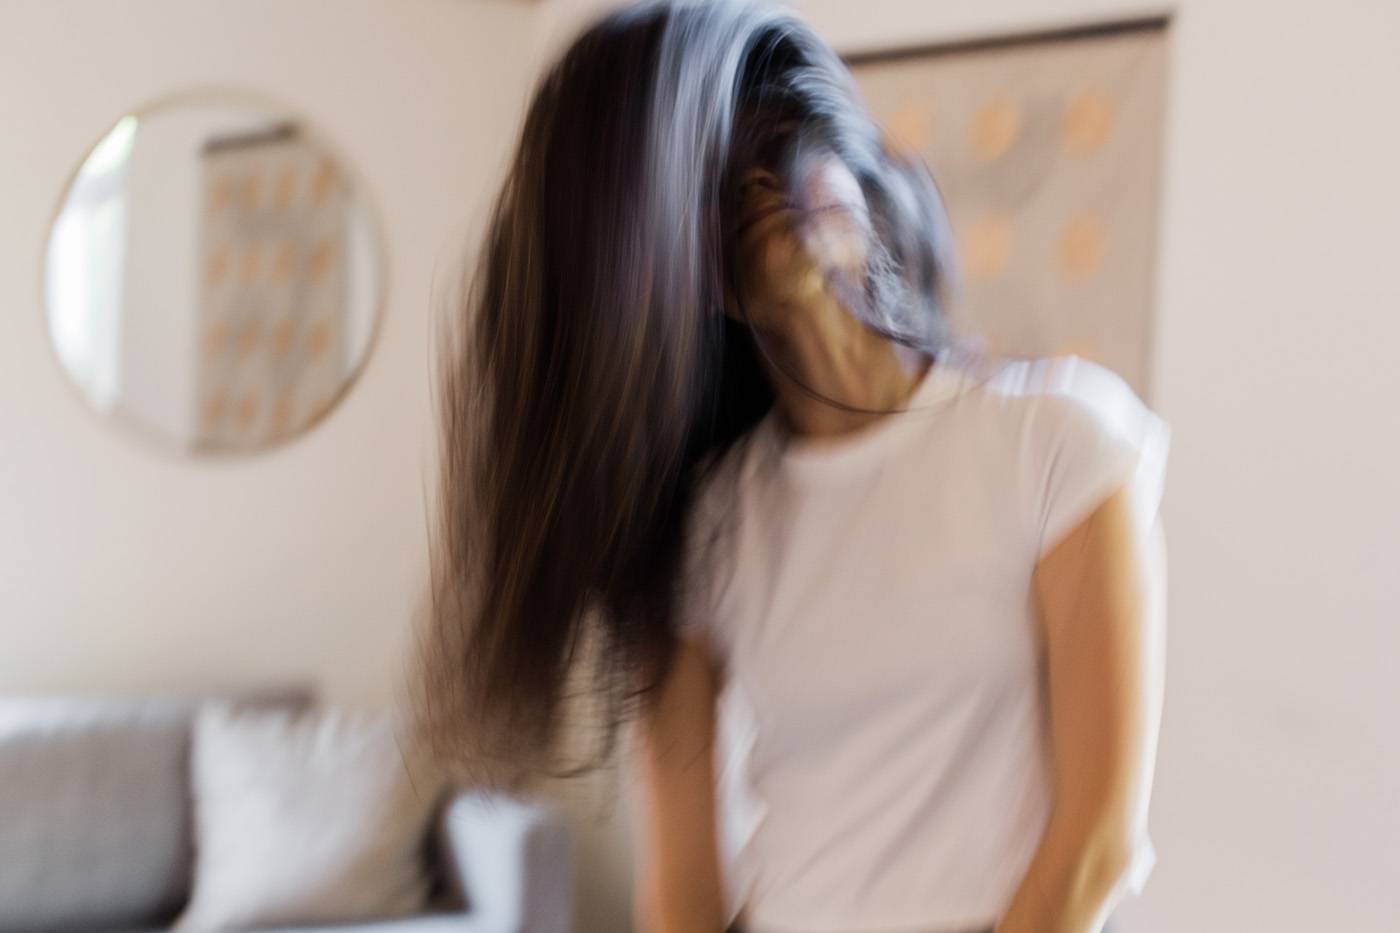 blurry photo of woman whipping hair while dancing to music